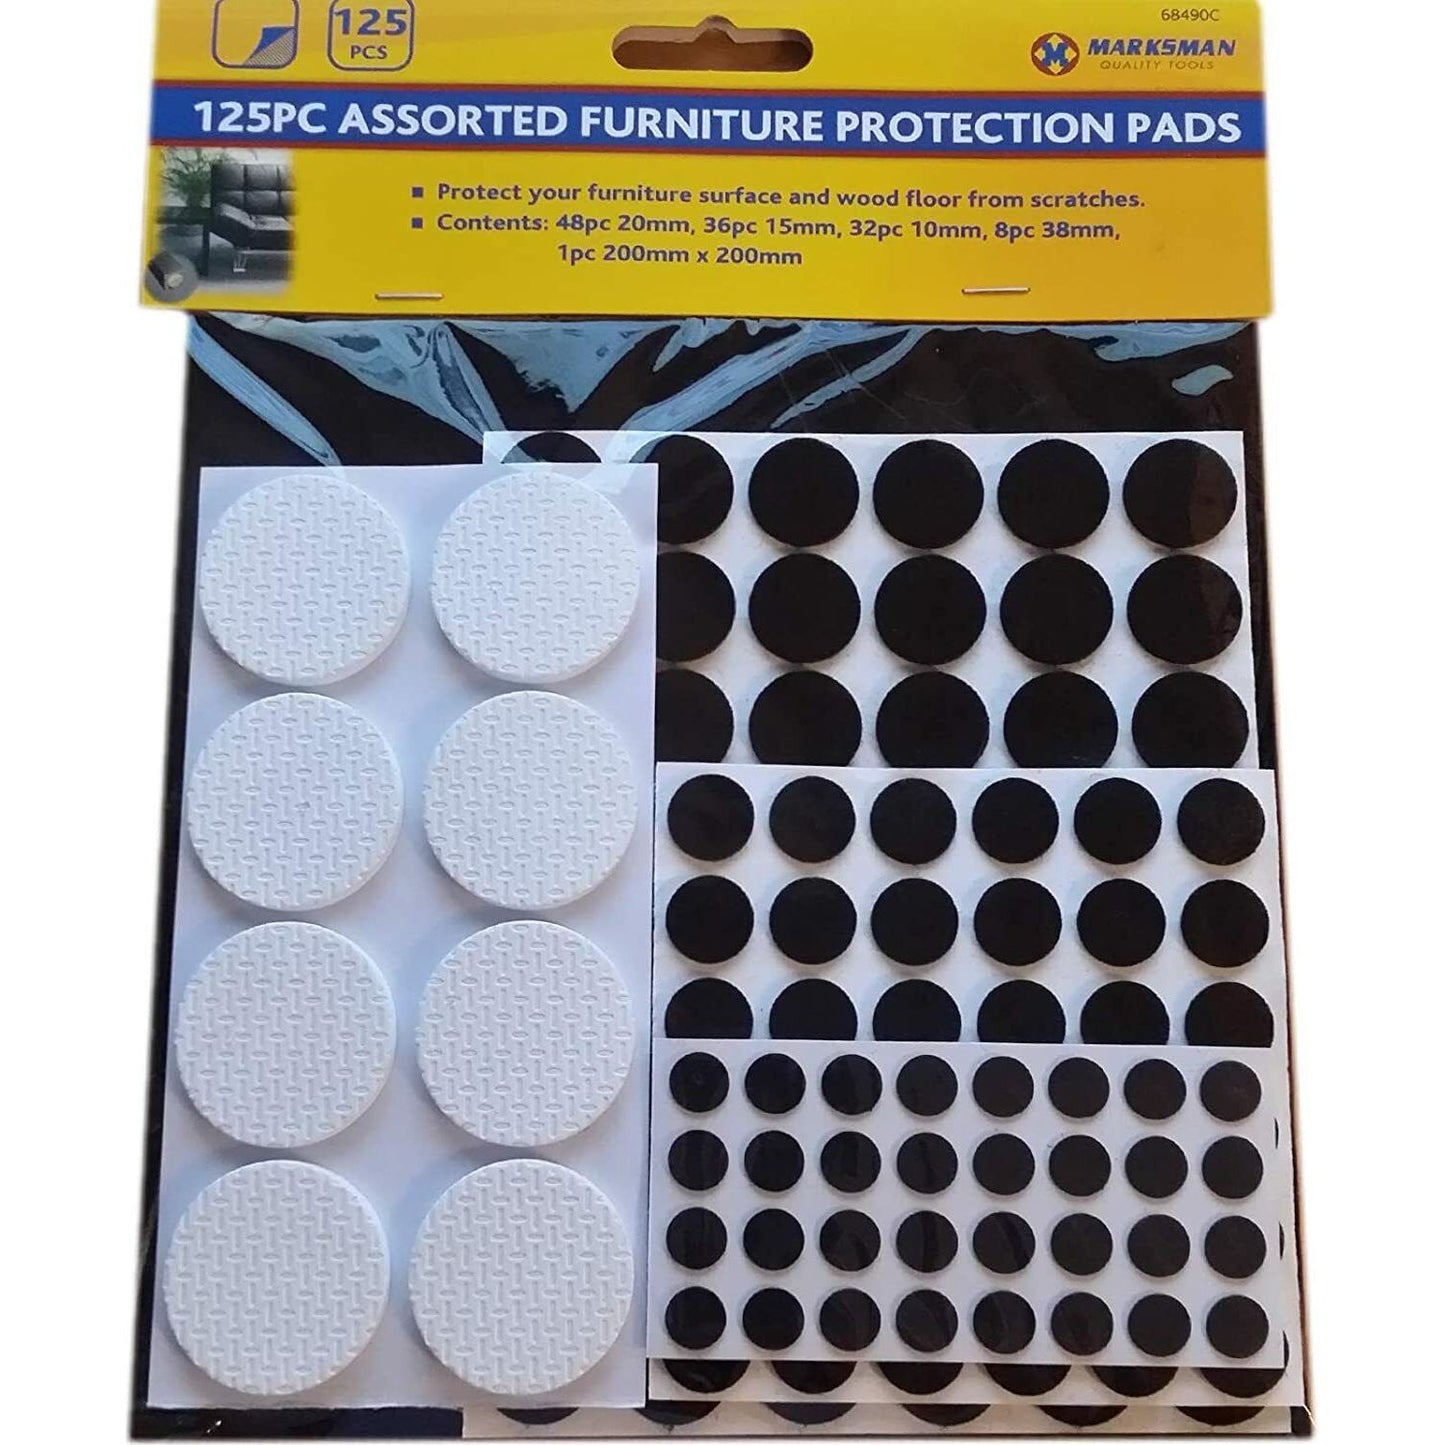 Furniture Protection Pads Grip Non Slip Chair Table Legs Sofa Woodfloor 125pc Uk